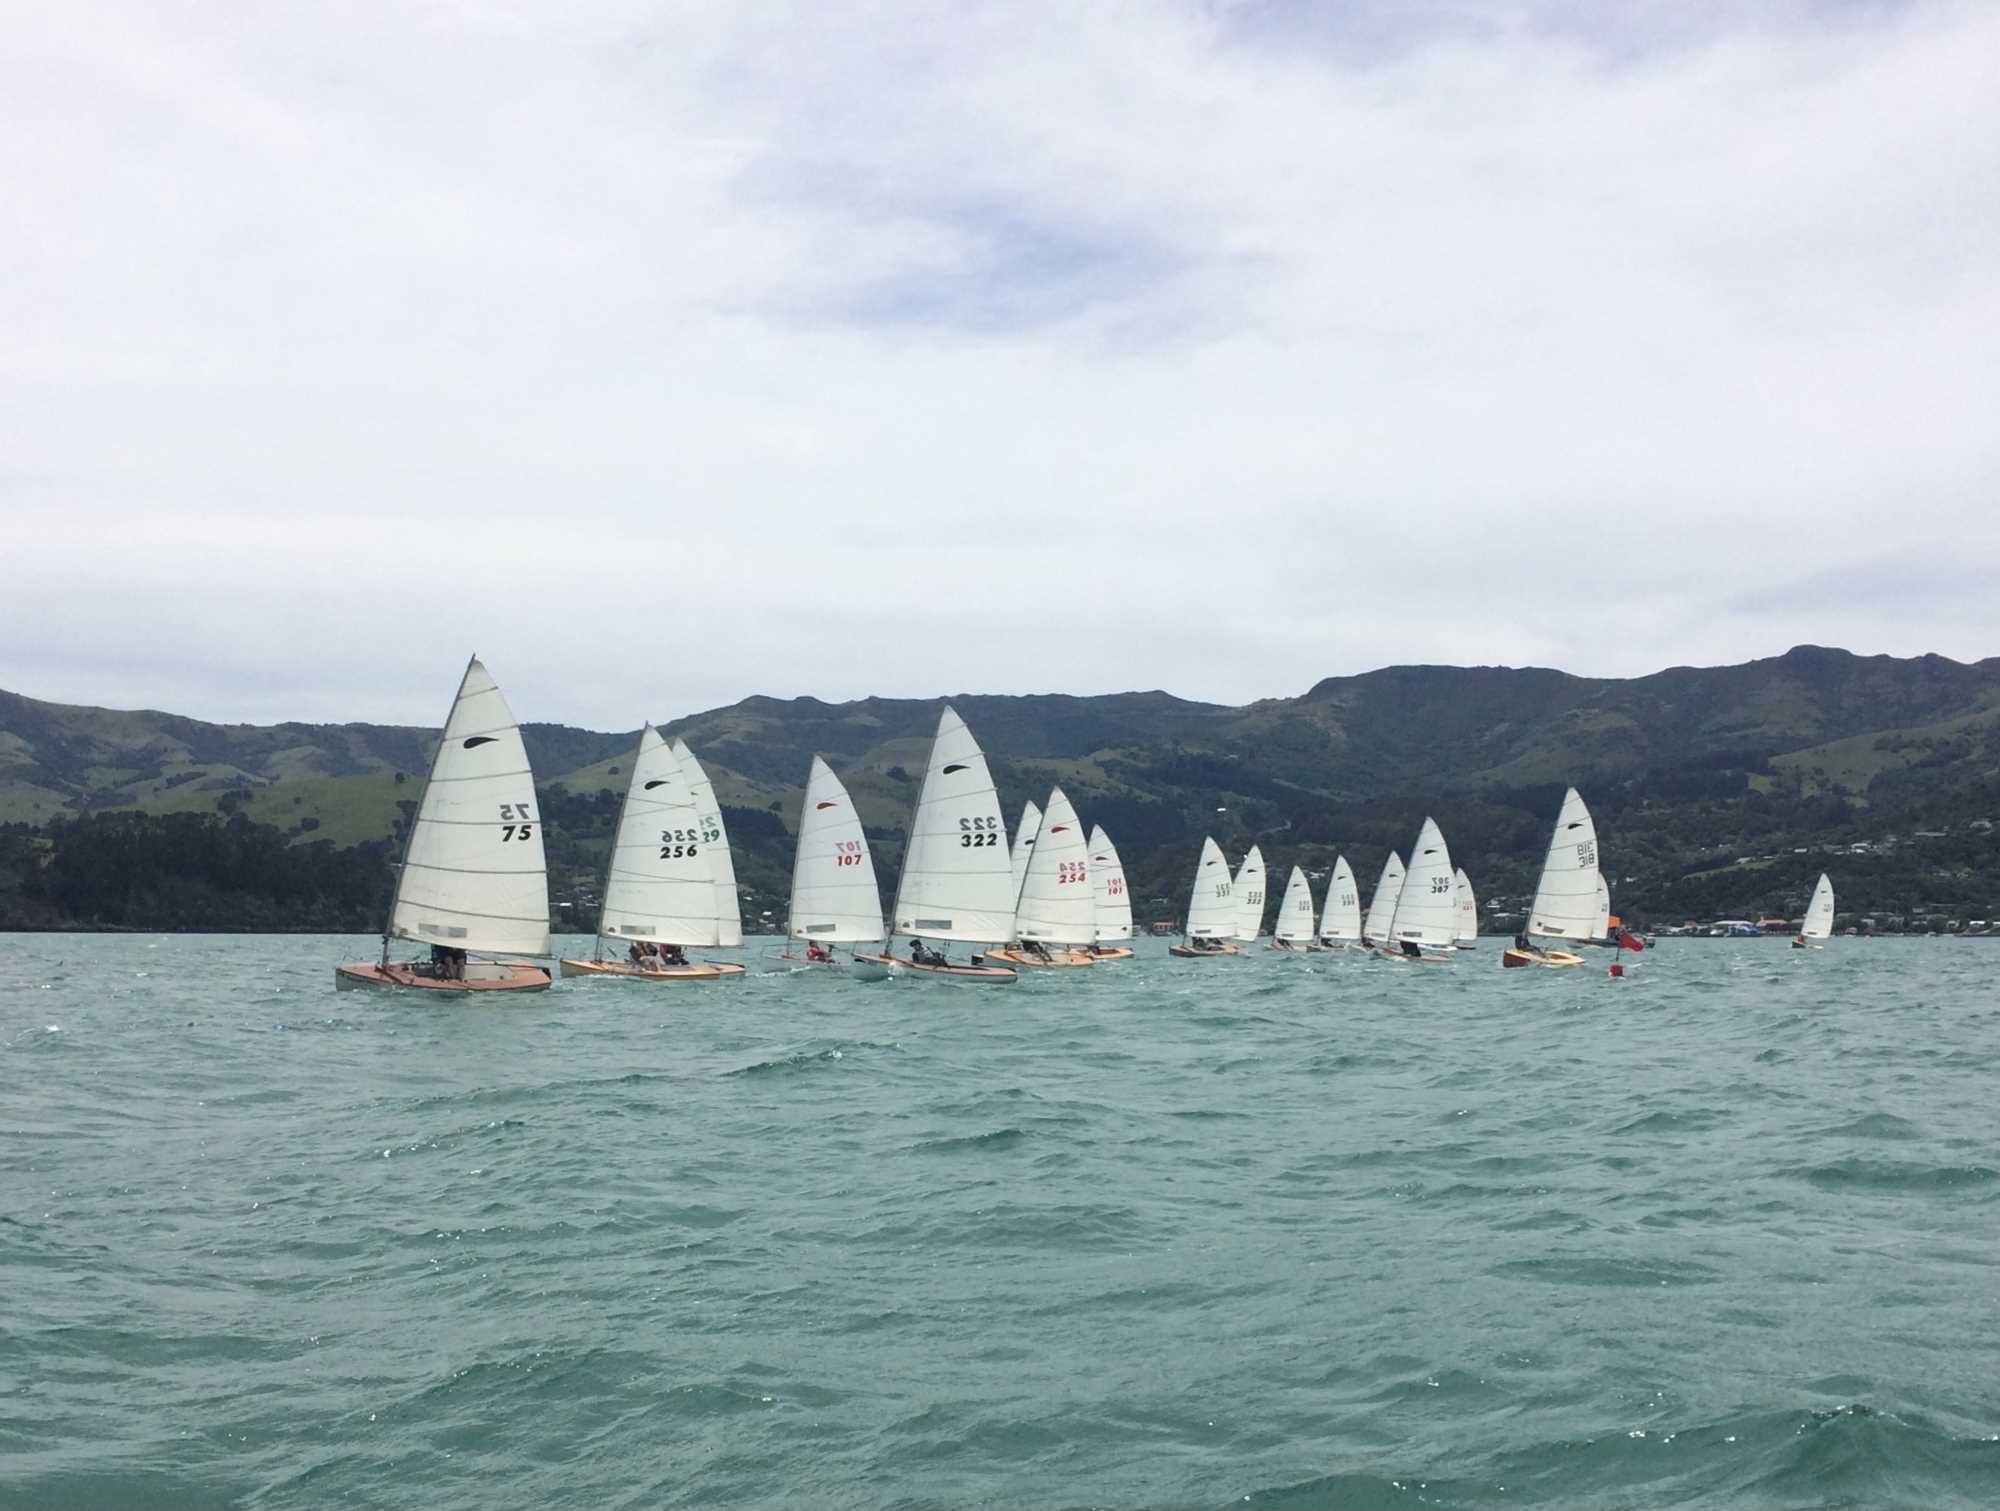 South Island Champs Report